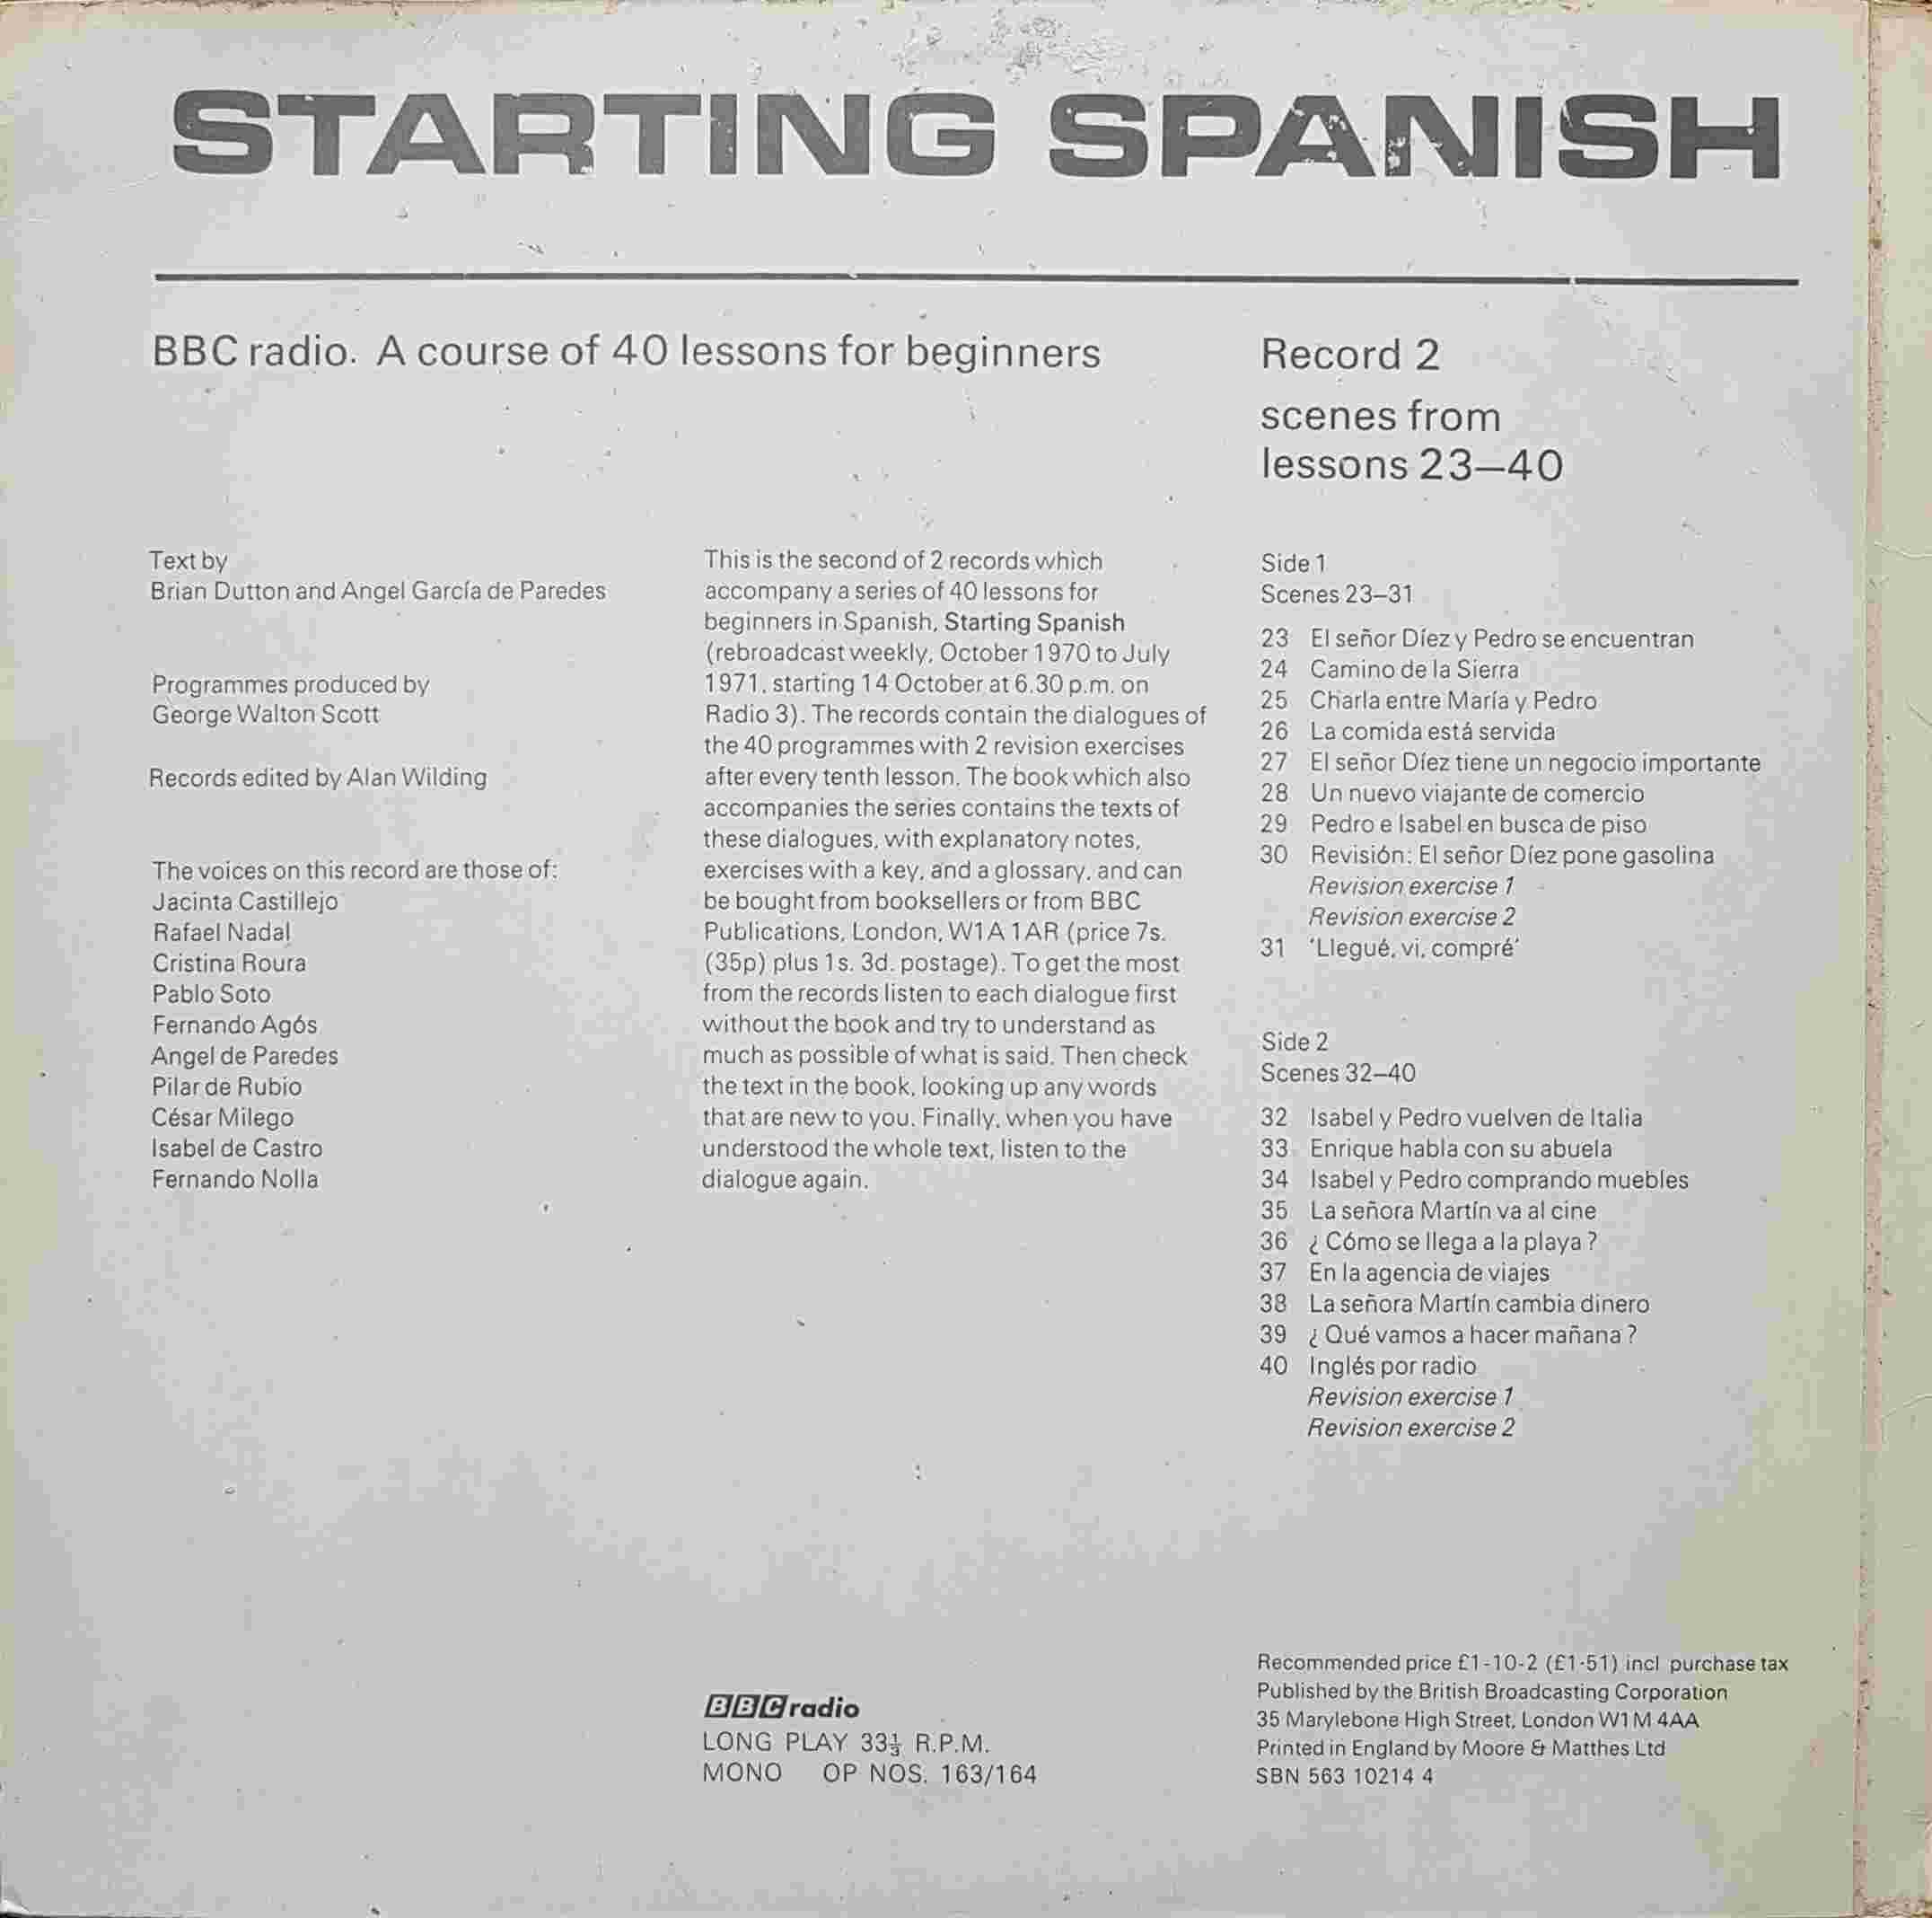 Picture of OP 163/164 Starting Spanish - A BBC Radio course of 40 lessons for beginners - Record 2 - Lessons 23 - 40 by artist Brian Dutton / Angel Garcia de Paredes from the BBC records and Tapes library